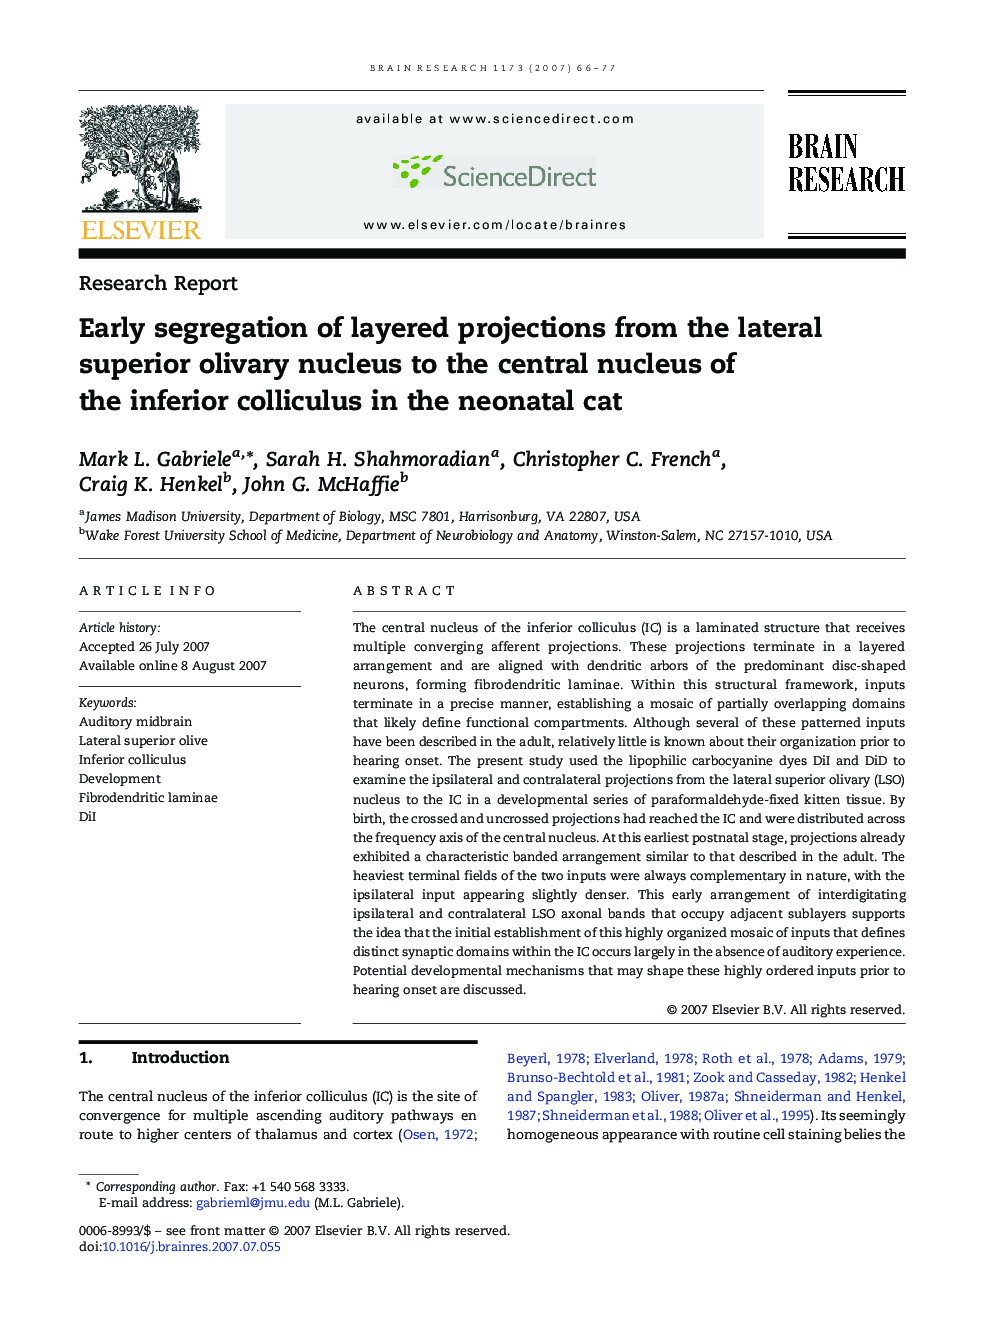 Early segregation of layered projections from the lateral superior olivary nucleus to the central nucleus of the inferior colliculus in the neonatal cat